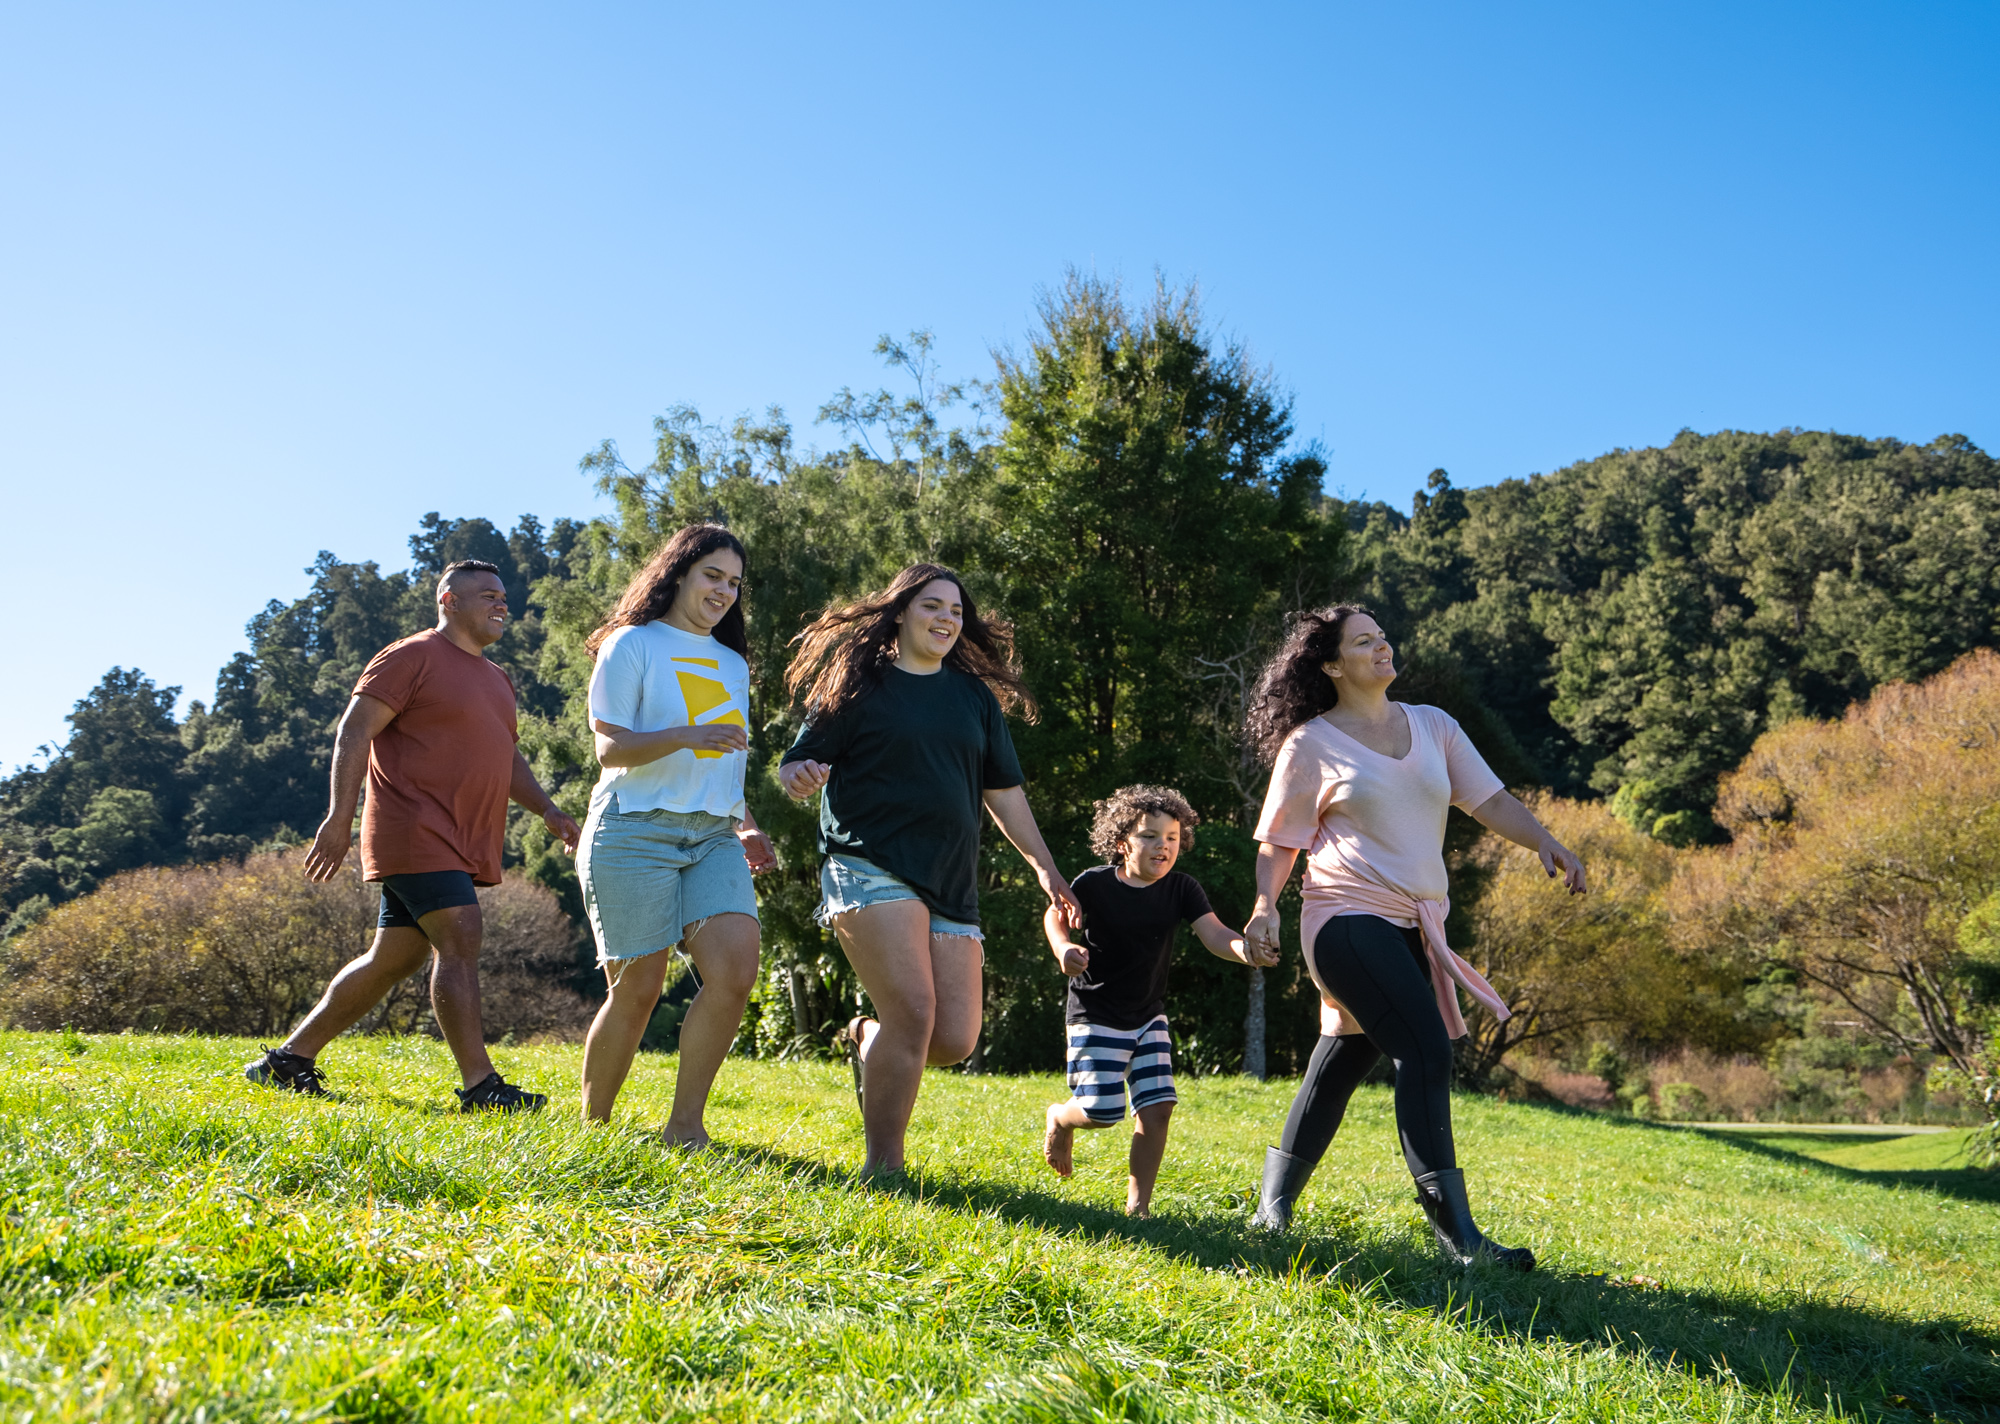 A family of five walks down a grassy hill in the sunshine